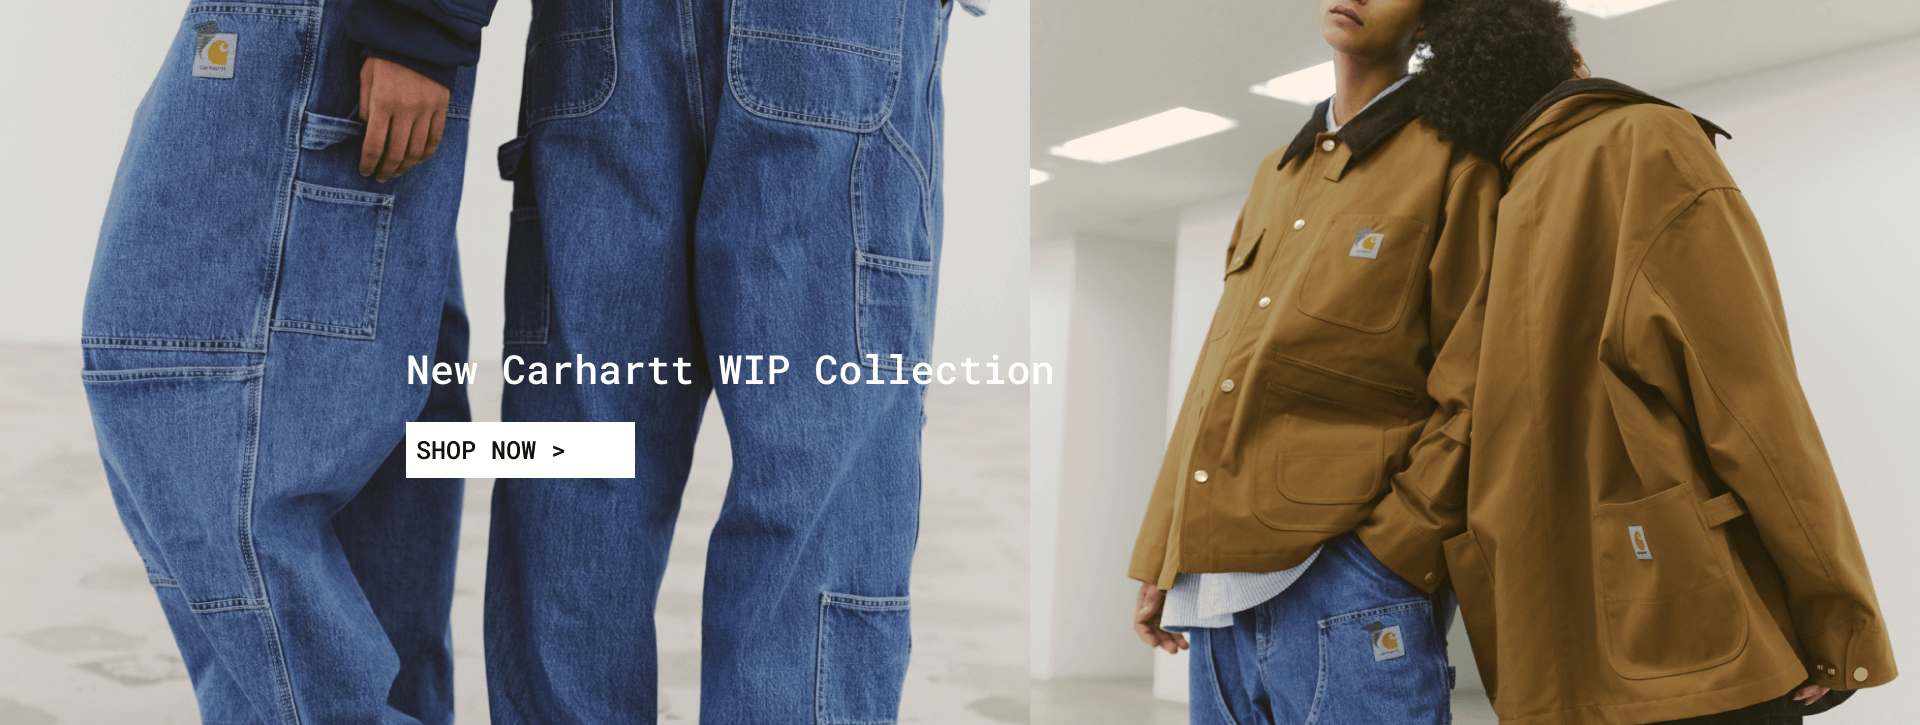 New Carhartt Collection